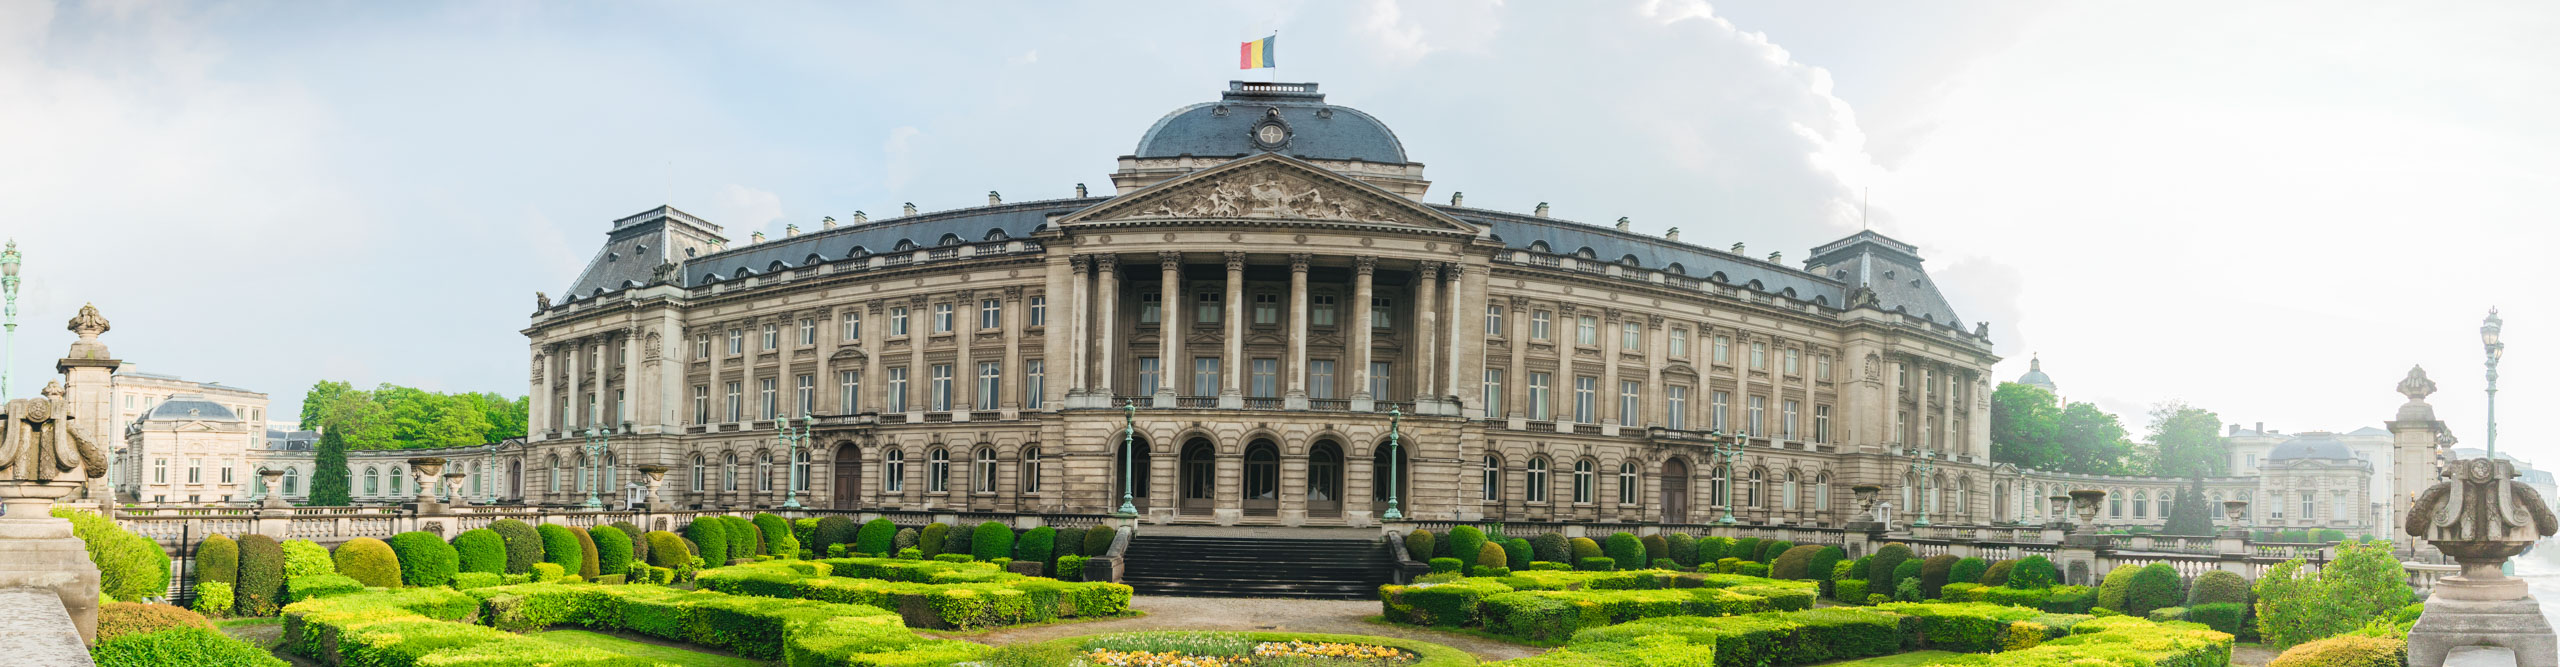 The entire faced of the Royal Palace and its gardens, on a sunny day in Brussels, Belgium